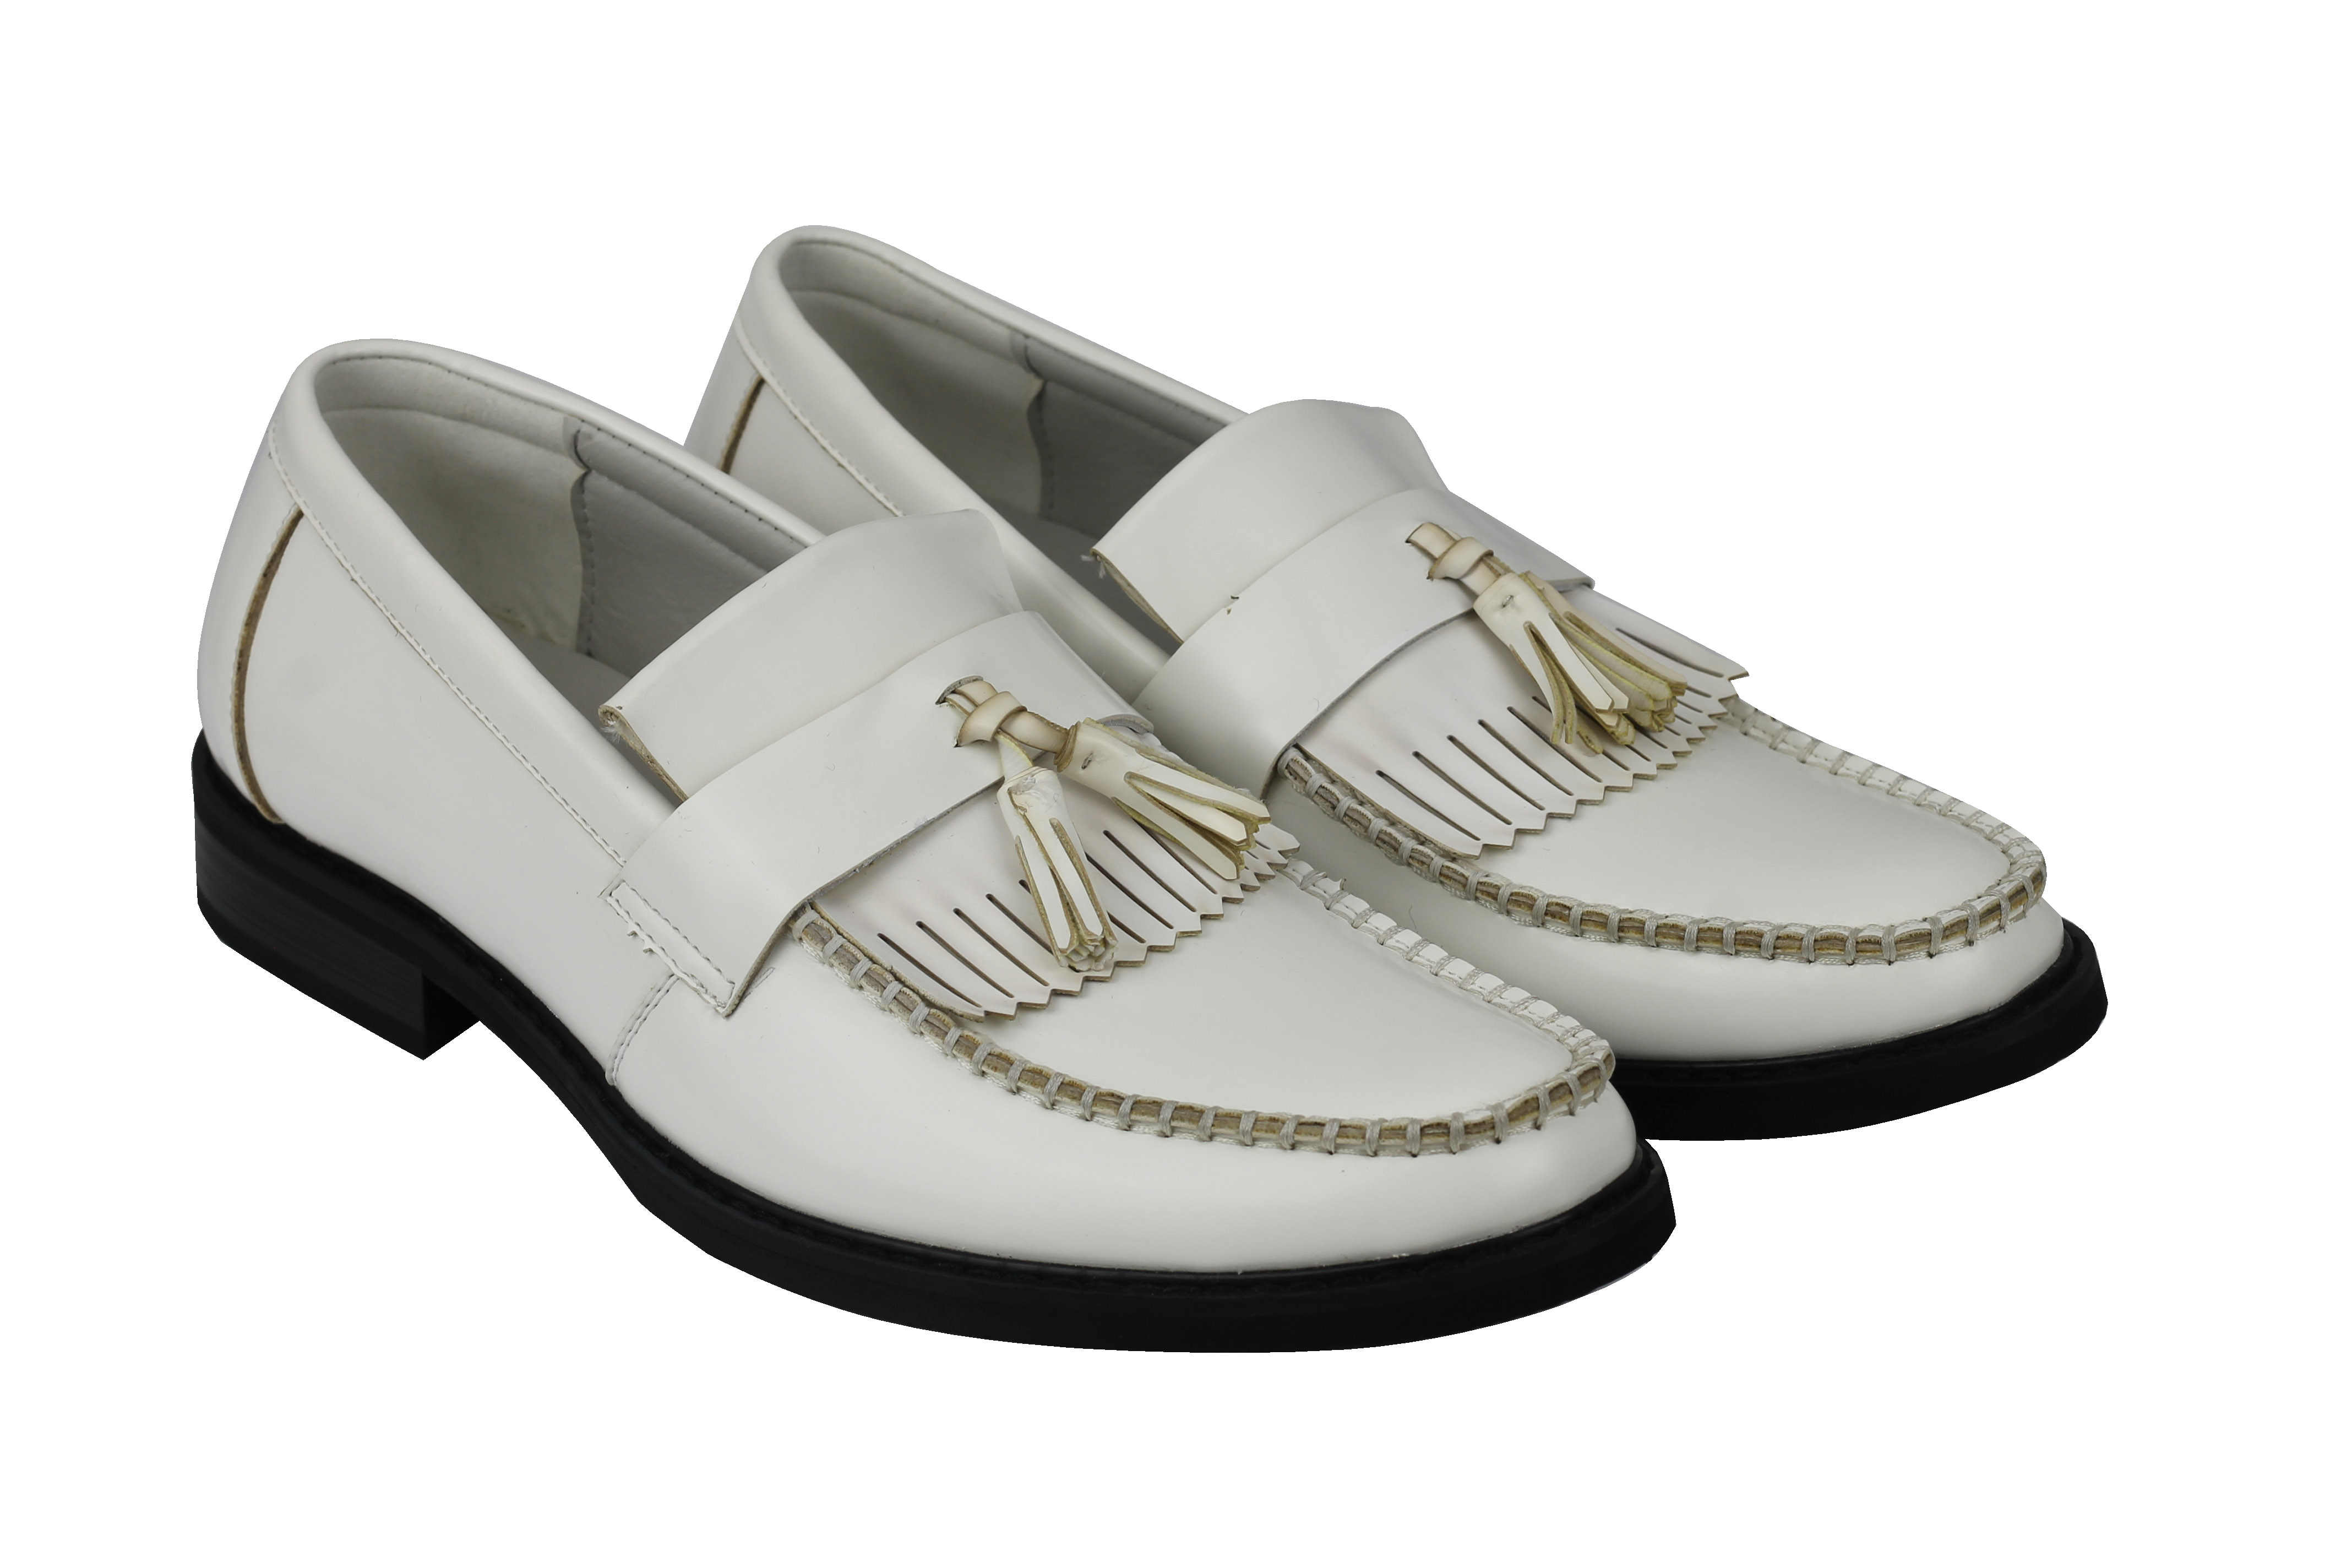 Mens Vintage Style Polished Faux Leather Tassel Loafers Retro MOD Shoes | eBay